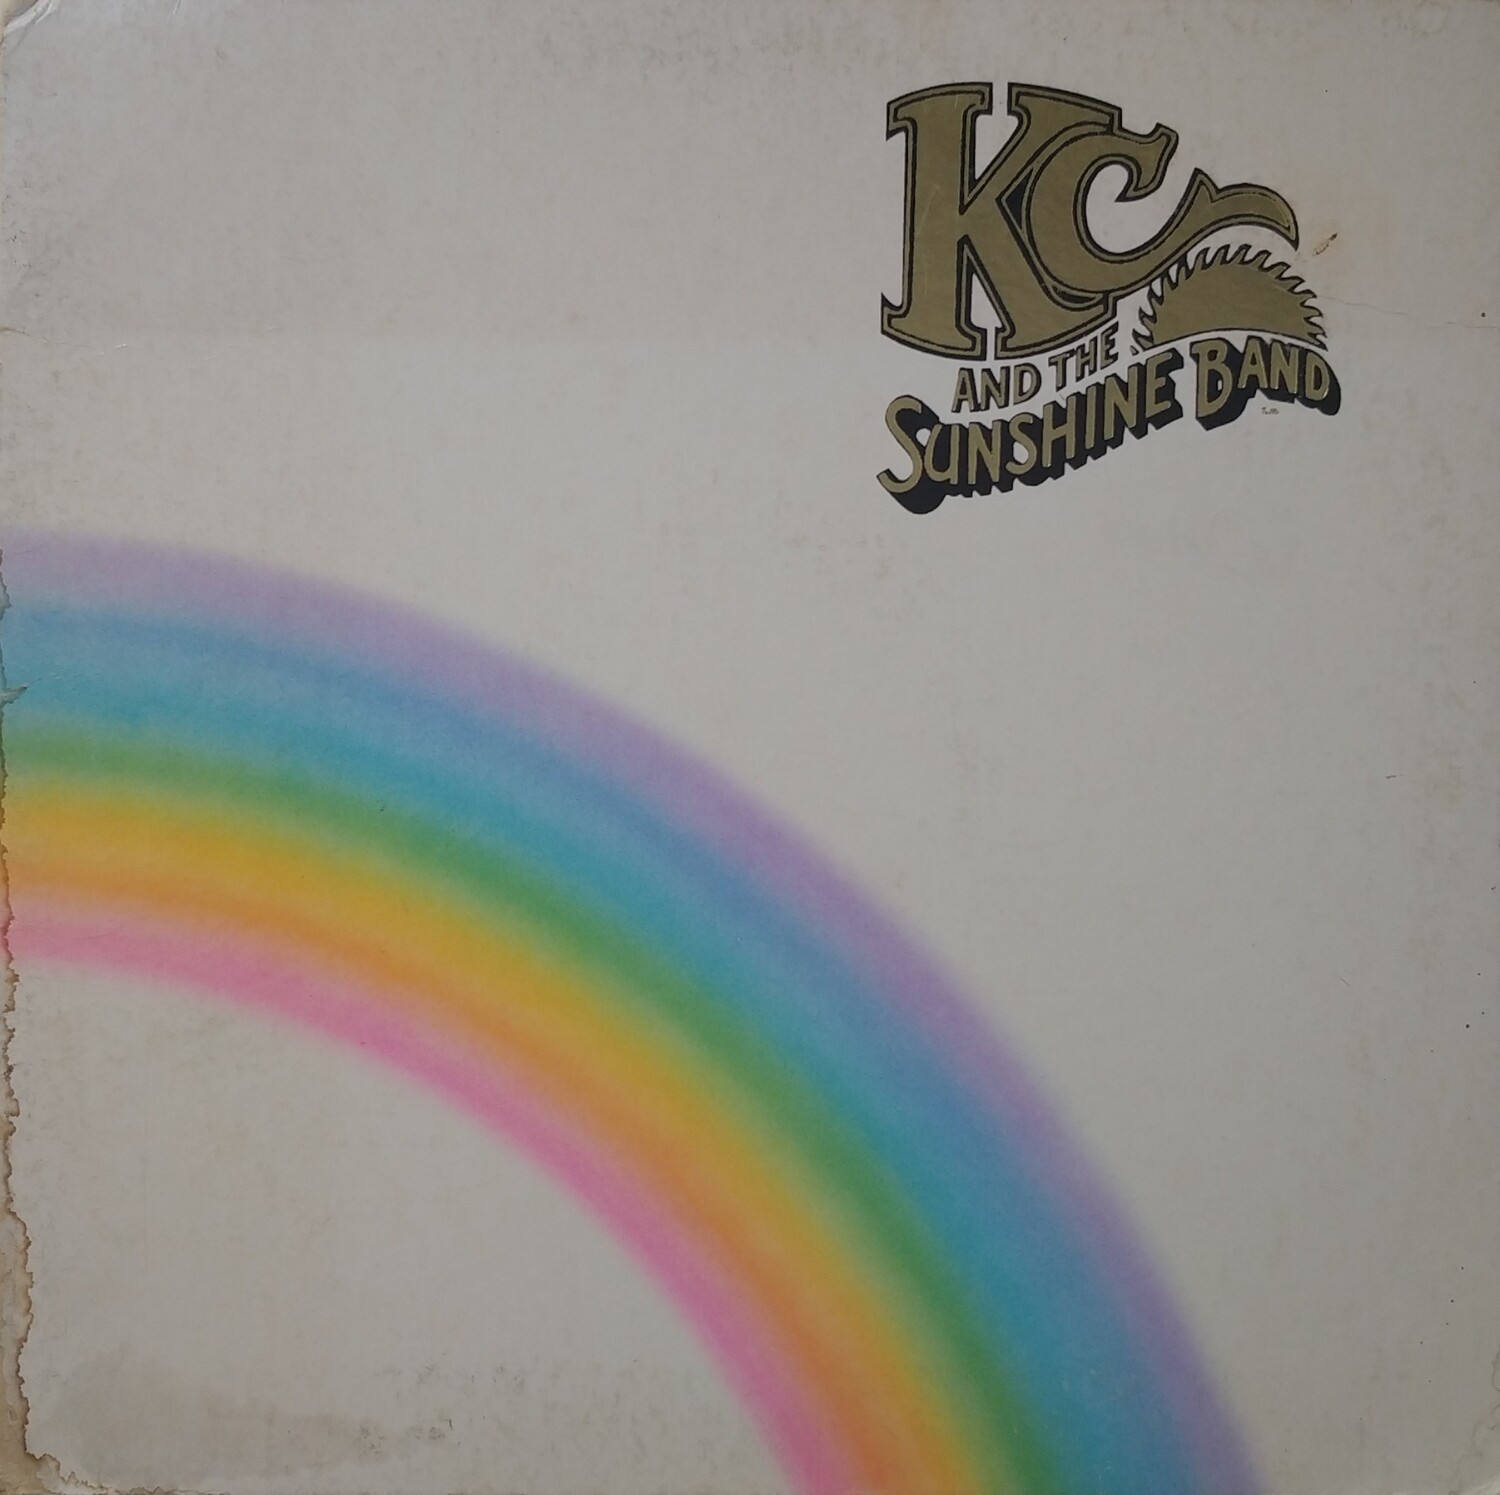 KC and the Sunshine Band - Part 3